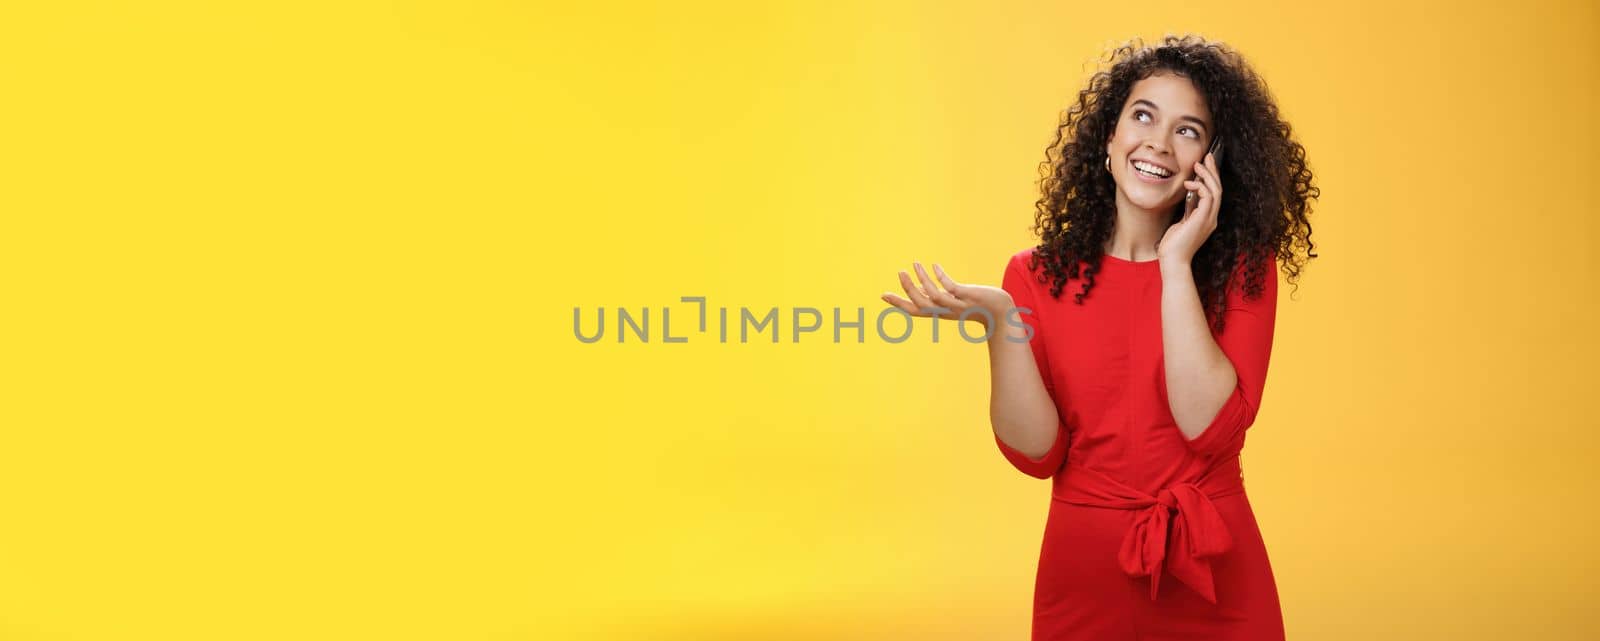 Carefree talkative cute woman with curly hair in red dress having char with friend on mobile phone holding smartphone near ear, gesturing as discussing exciting news, looking at upper left corner.